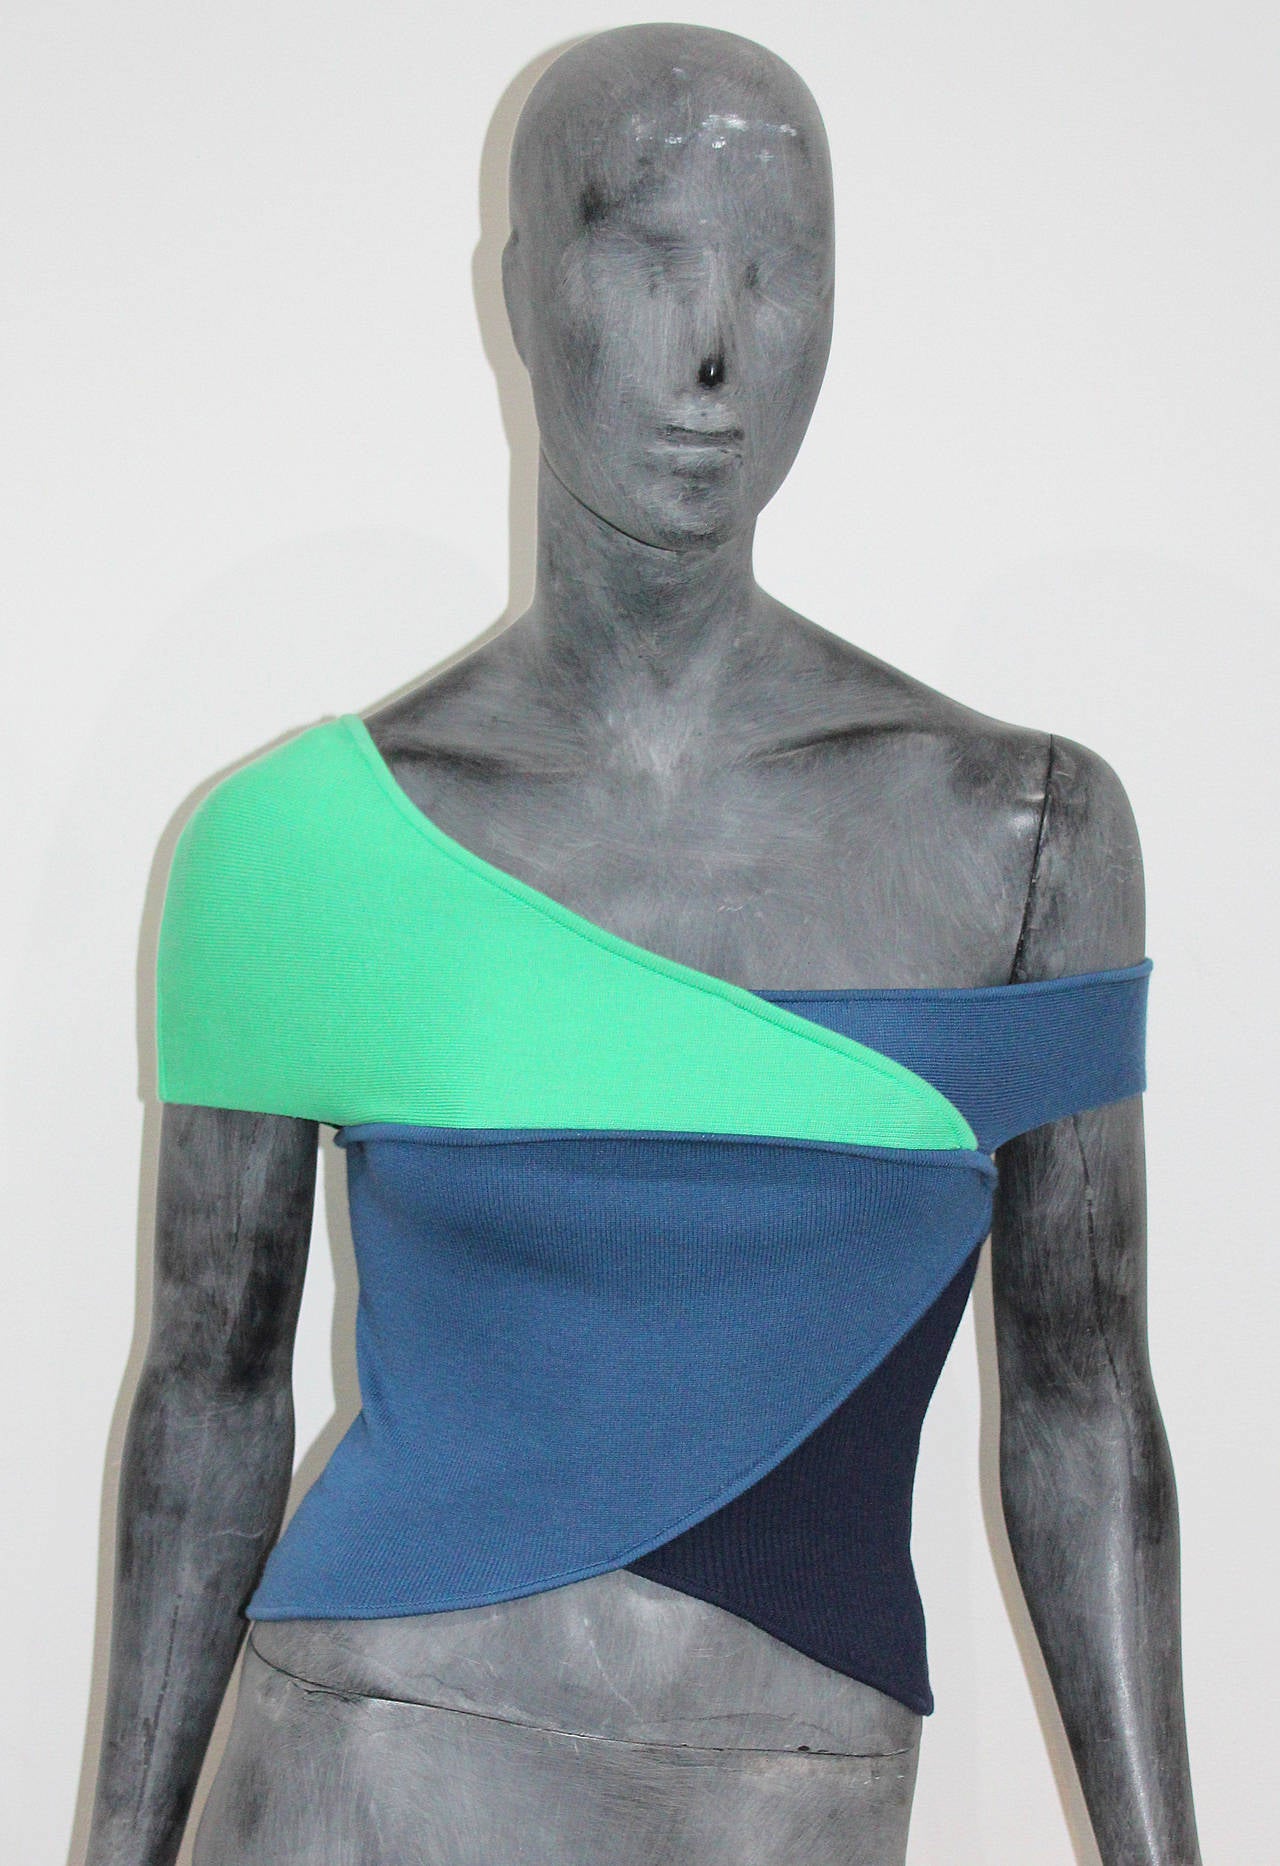 Multicoloured bondage style rib knit crop top from the 1990s by Emilio Pucci.